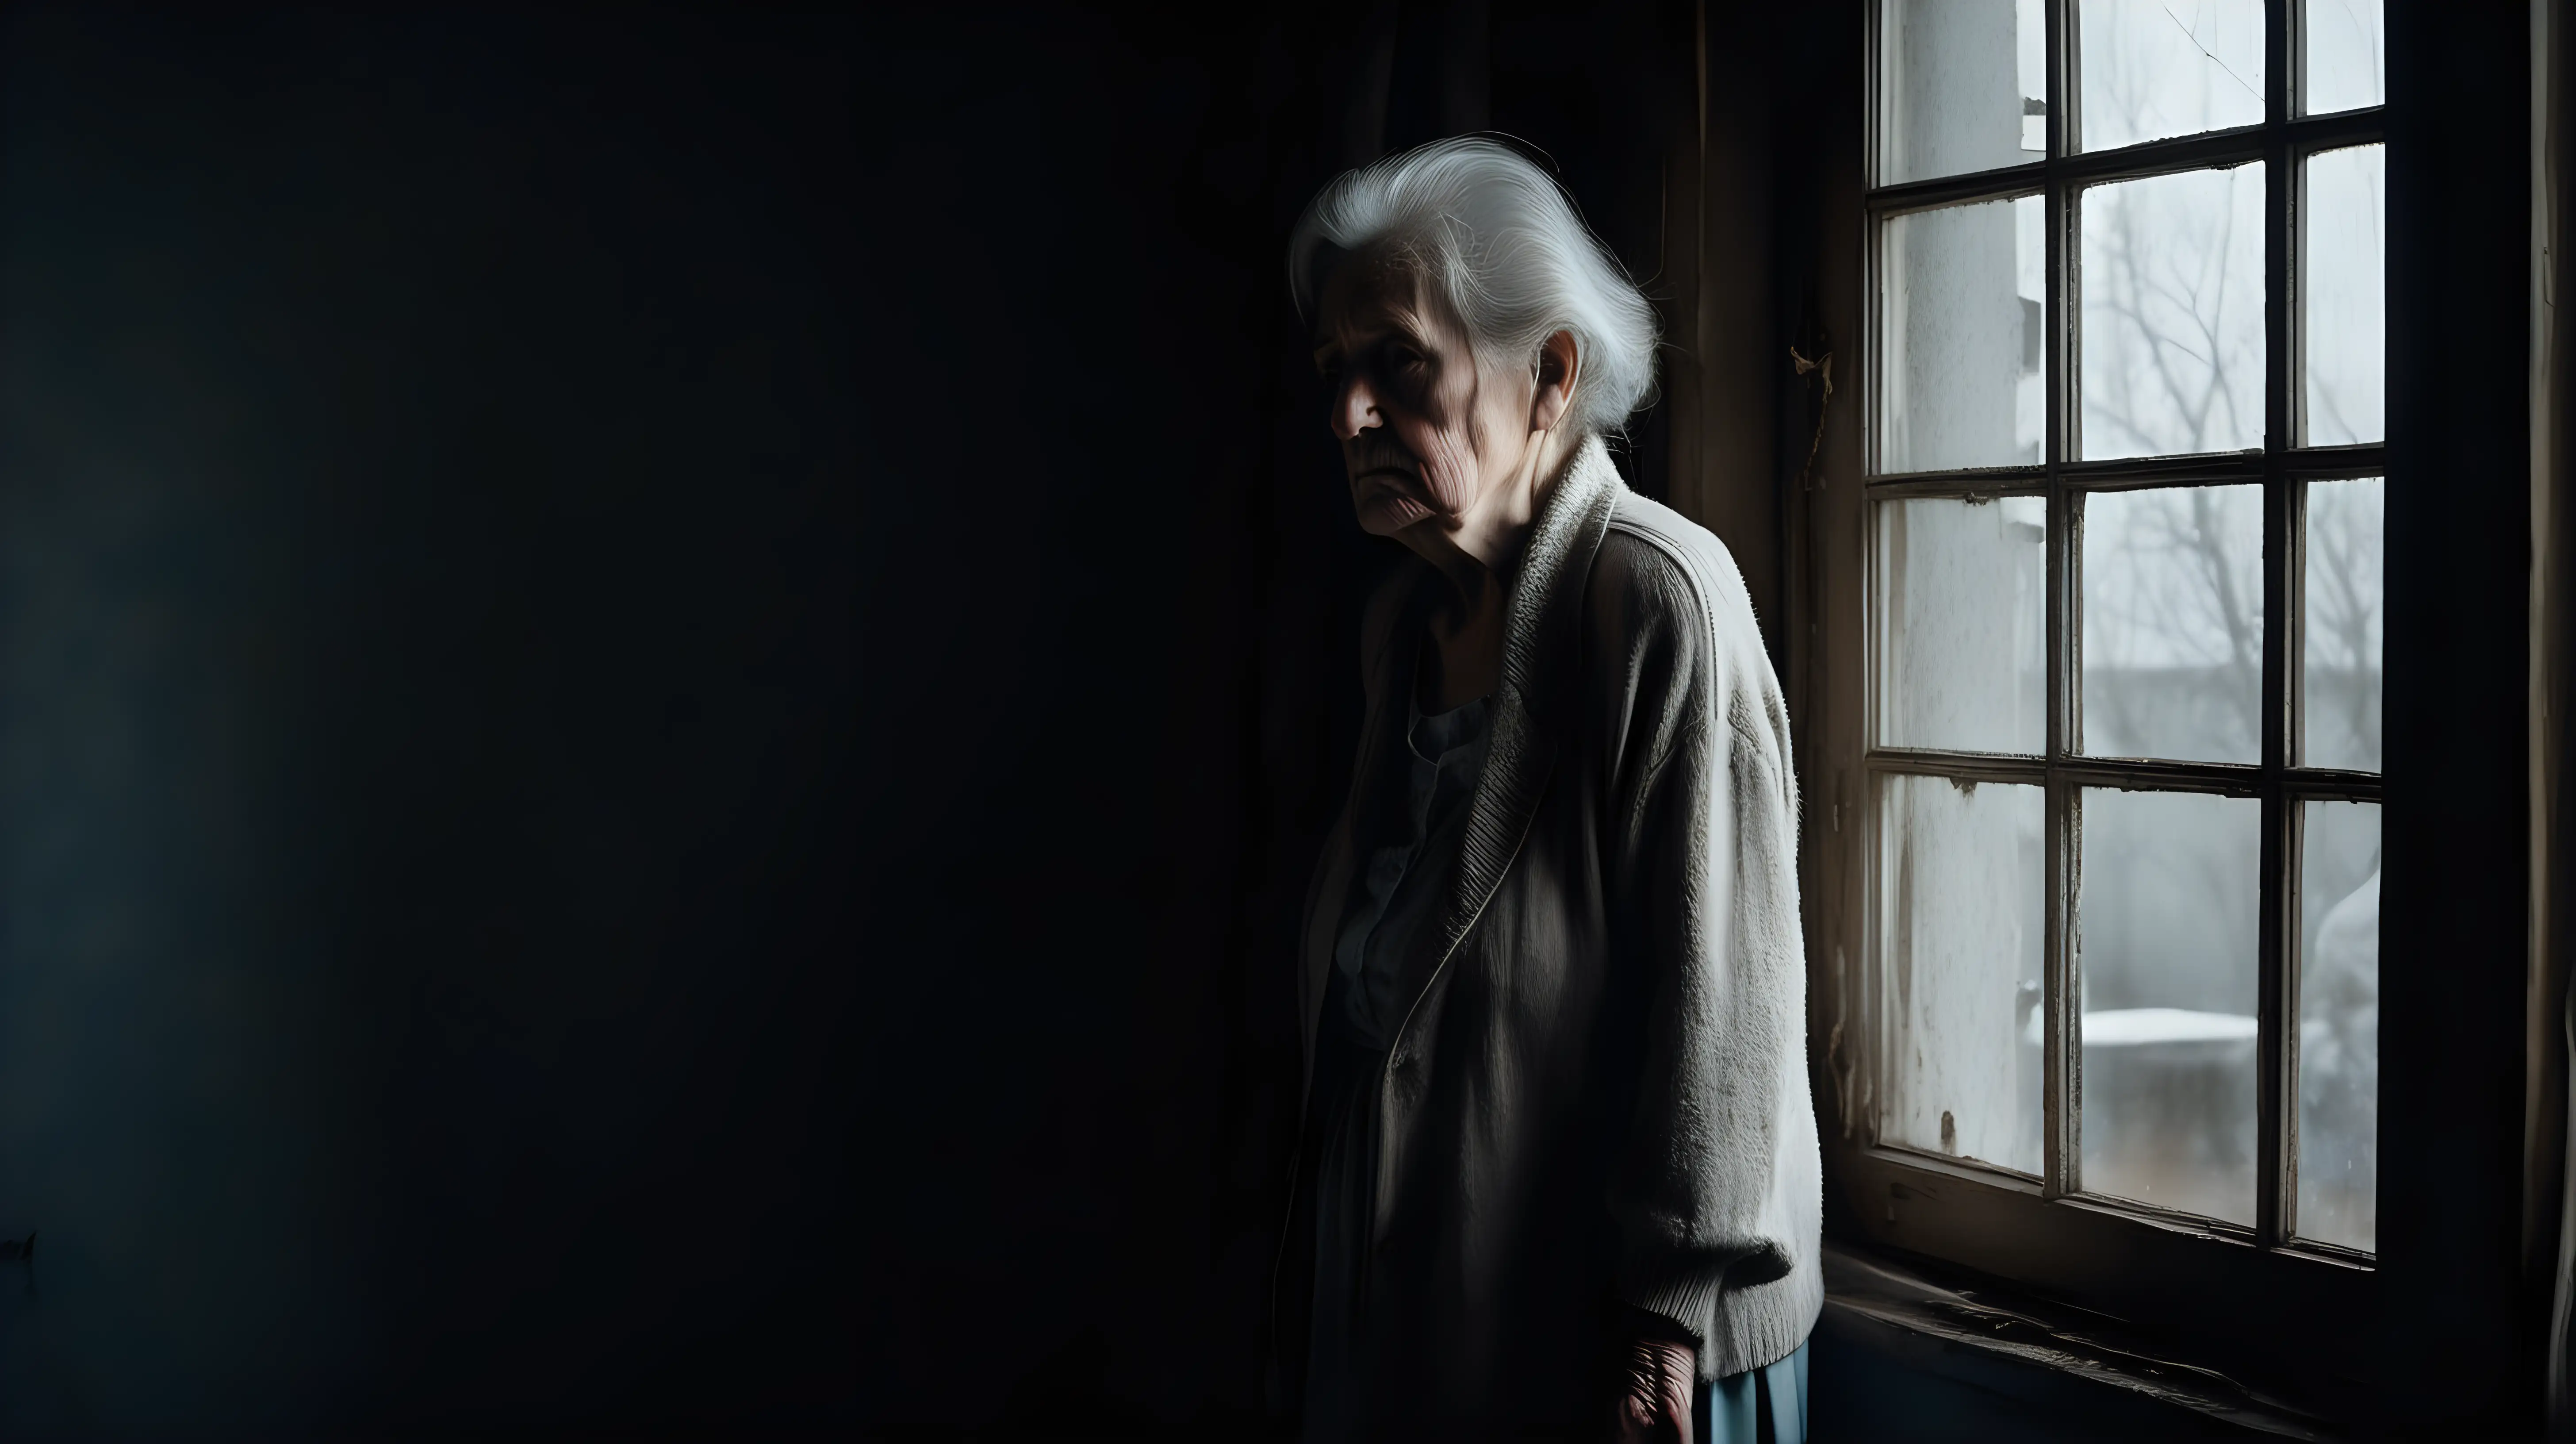 Lonely Elderly Woman Contemplating in Dimly Lit Room